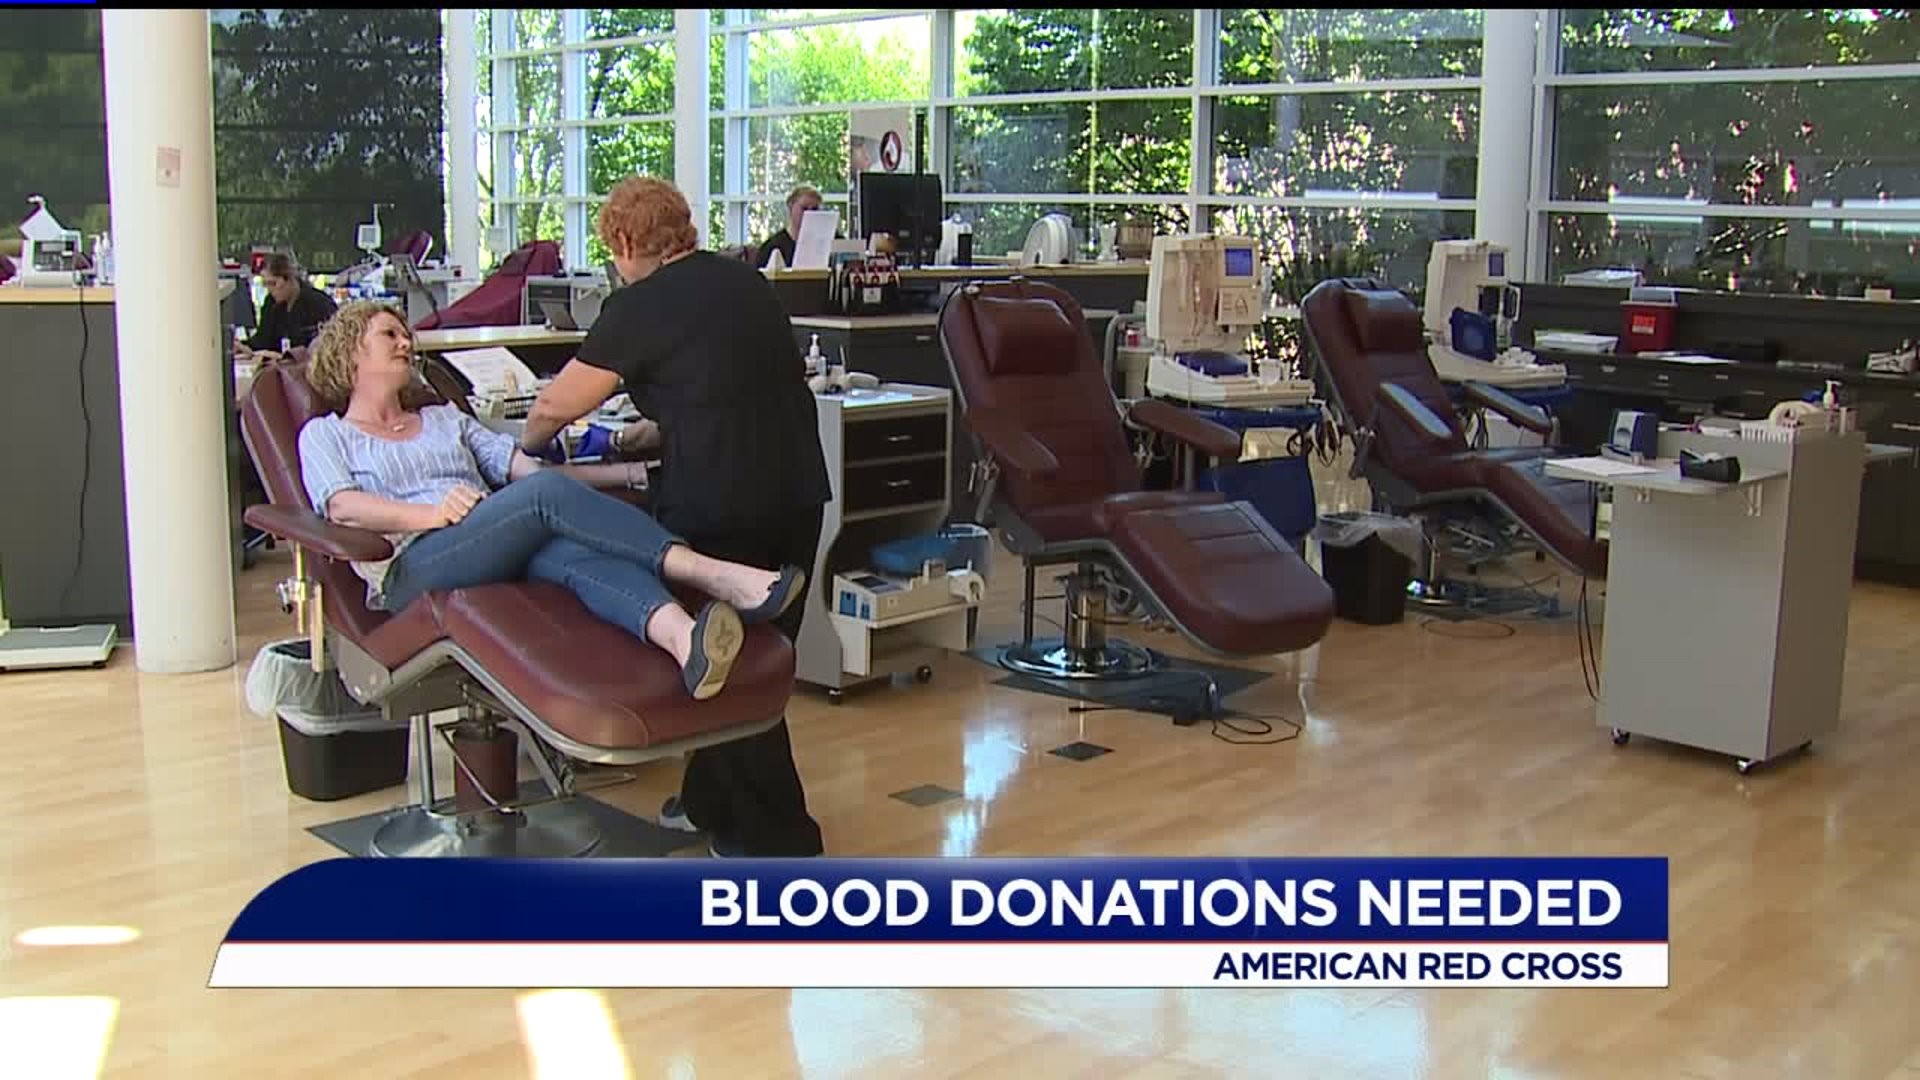 Red Cross says they`re in need of blood donations